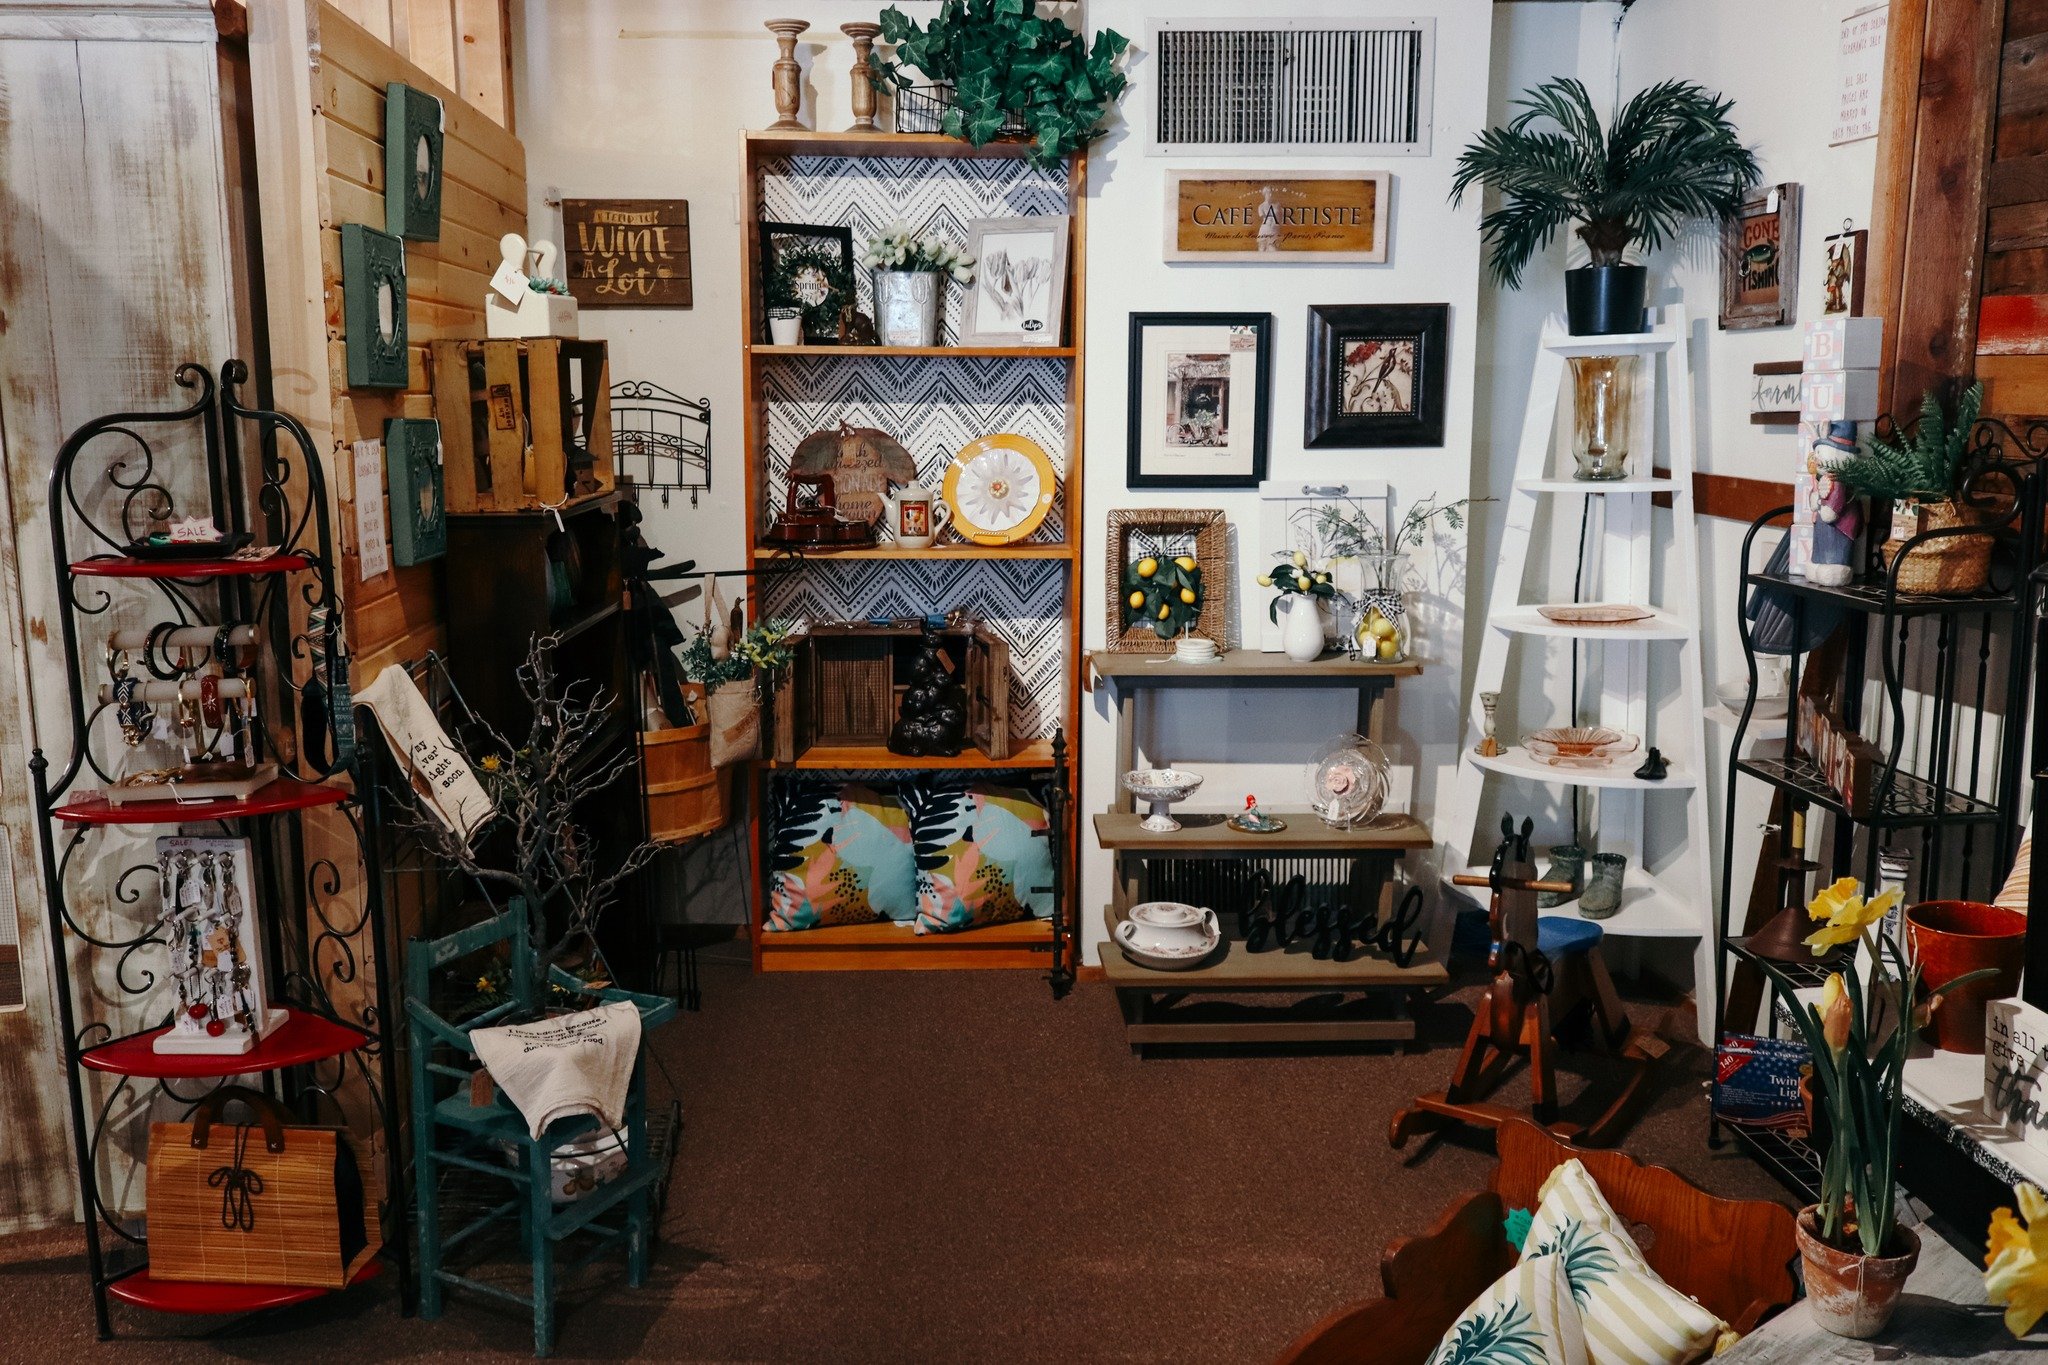 WE HAVE A WIDE SELECTION OF HOME DECOR!

Our charming 8,000 square foot space offers over 90+ small shops specializing in home d&eacute;cor, furniture, antiques, rustic accents, and more. Snag a friend and visit us! We open today at 10AM.

www.presti